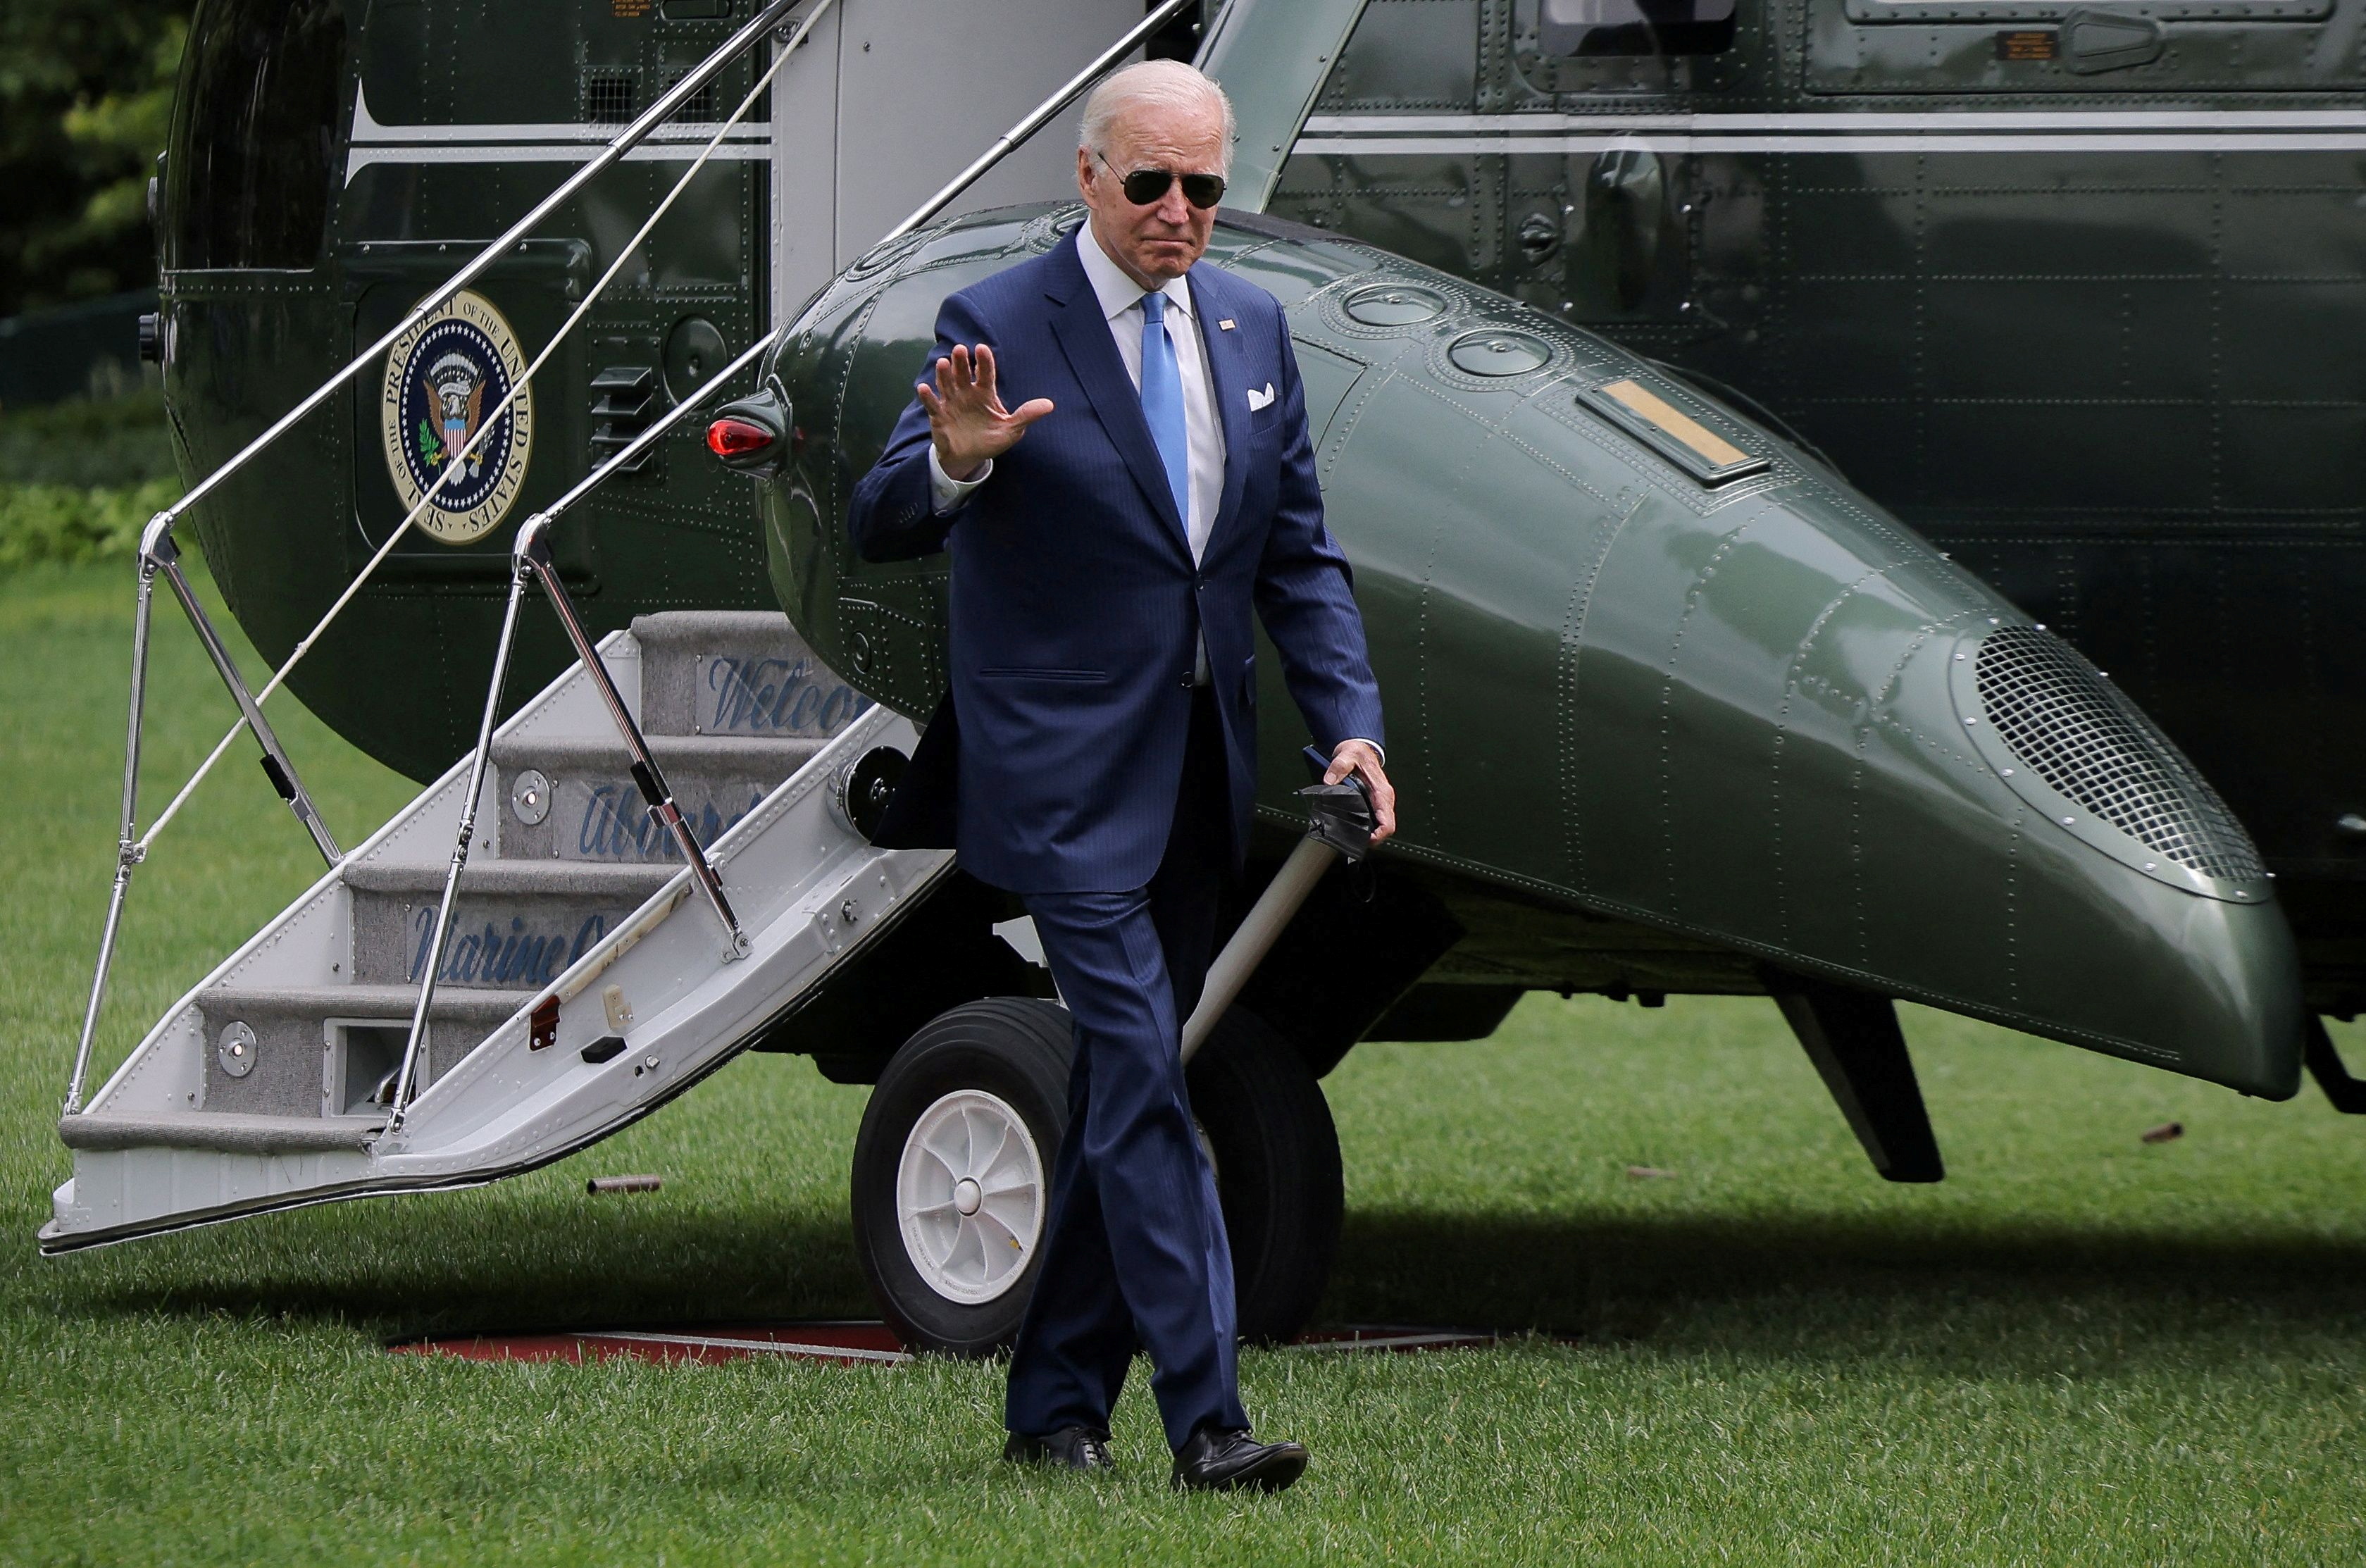 U.S. President Joe Biden arrives at the White House following an interagency briefing on hurricane preparedness at Joint Base Andrews, in Washington